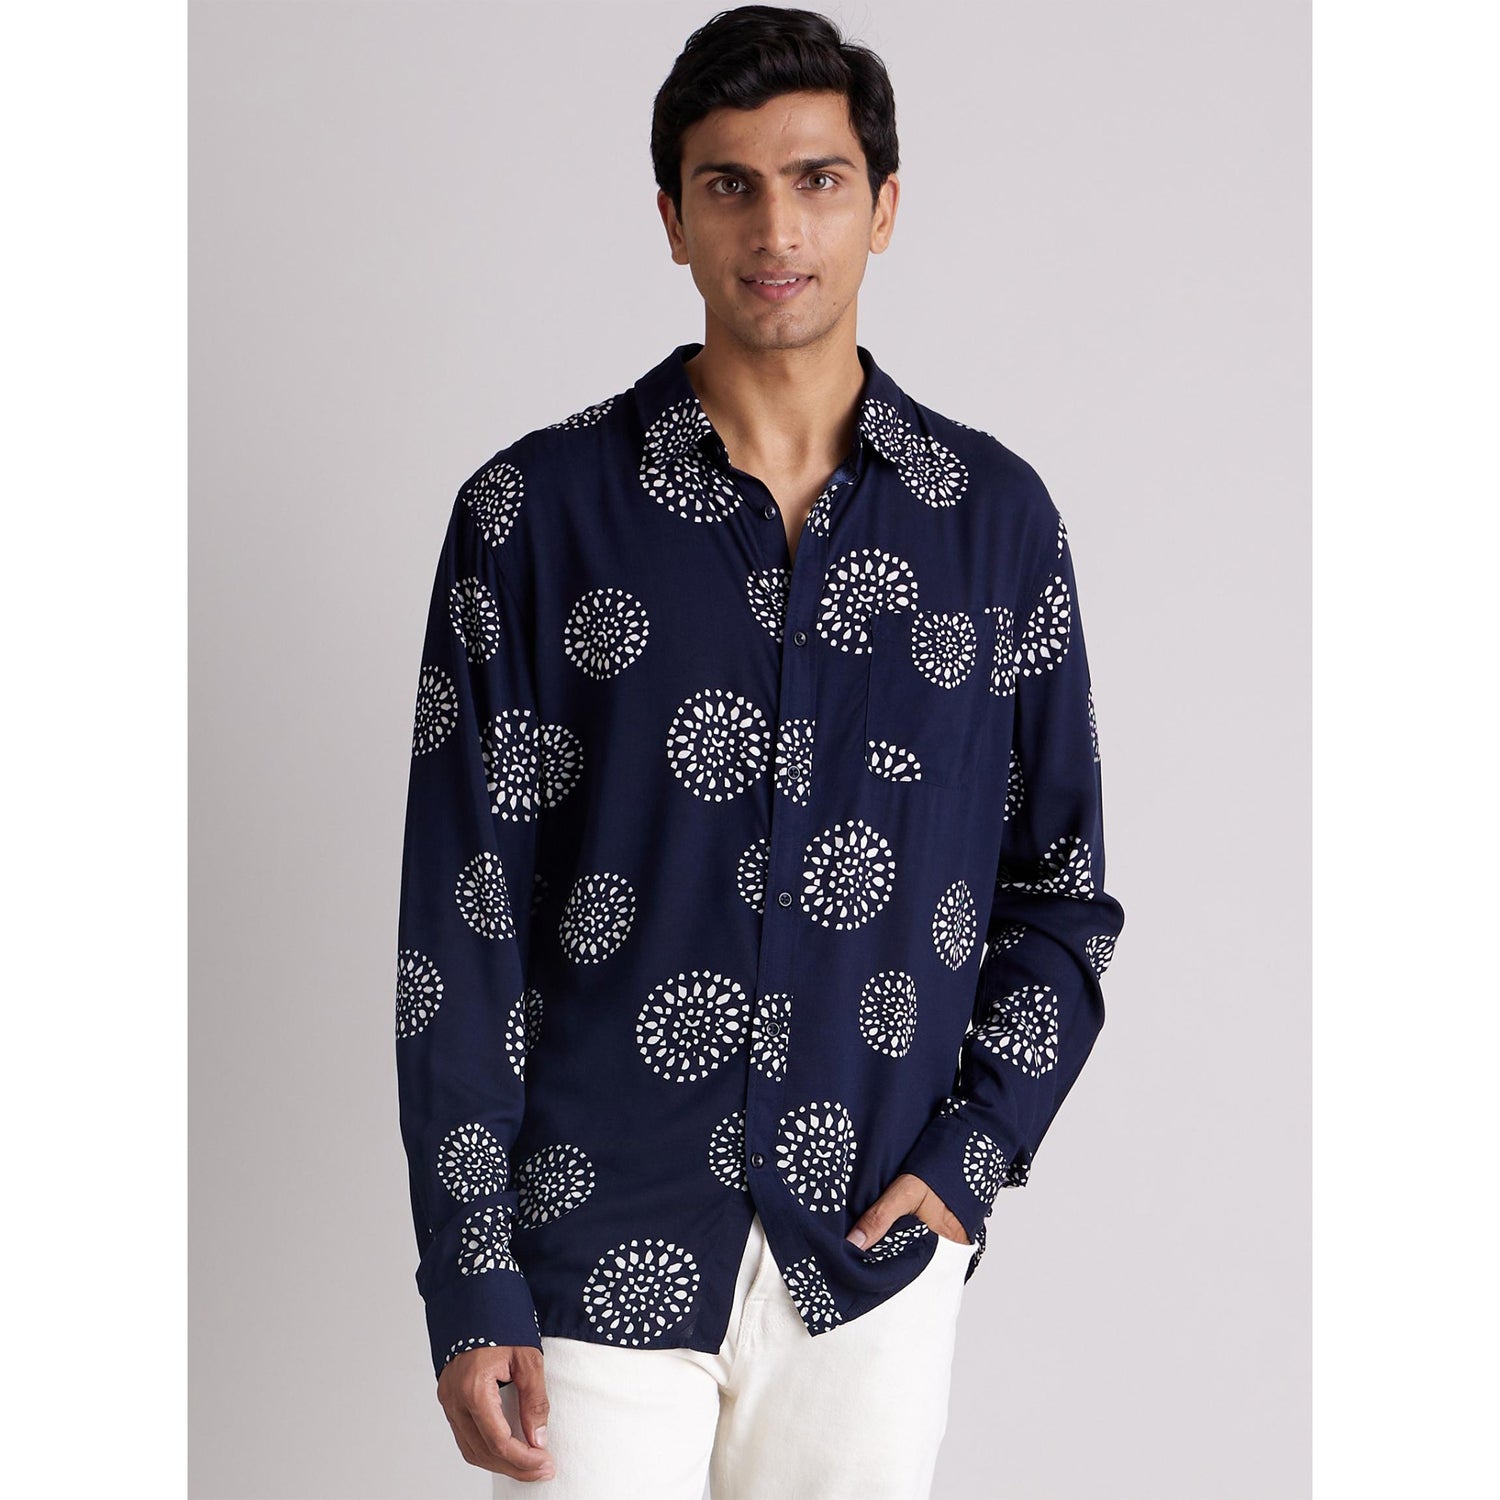 Soft Touch Printed Navy Blue Long Sleeves Shirt